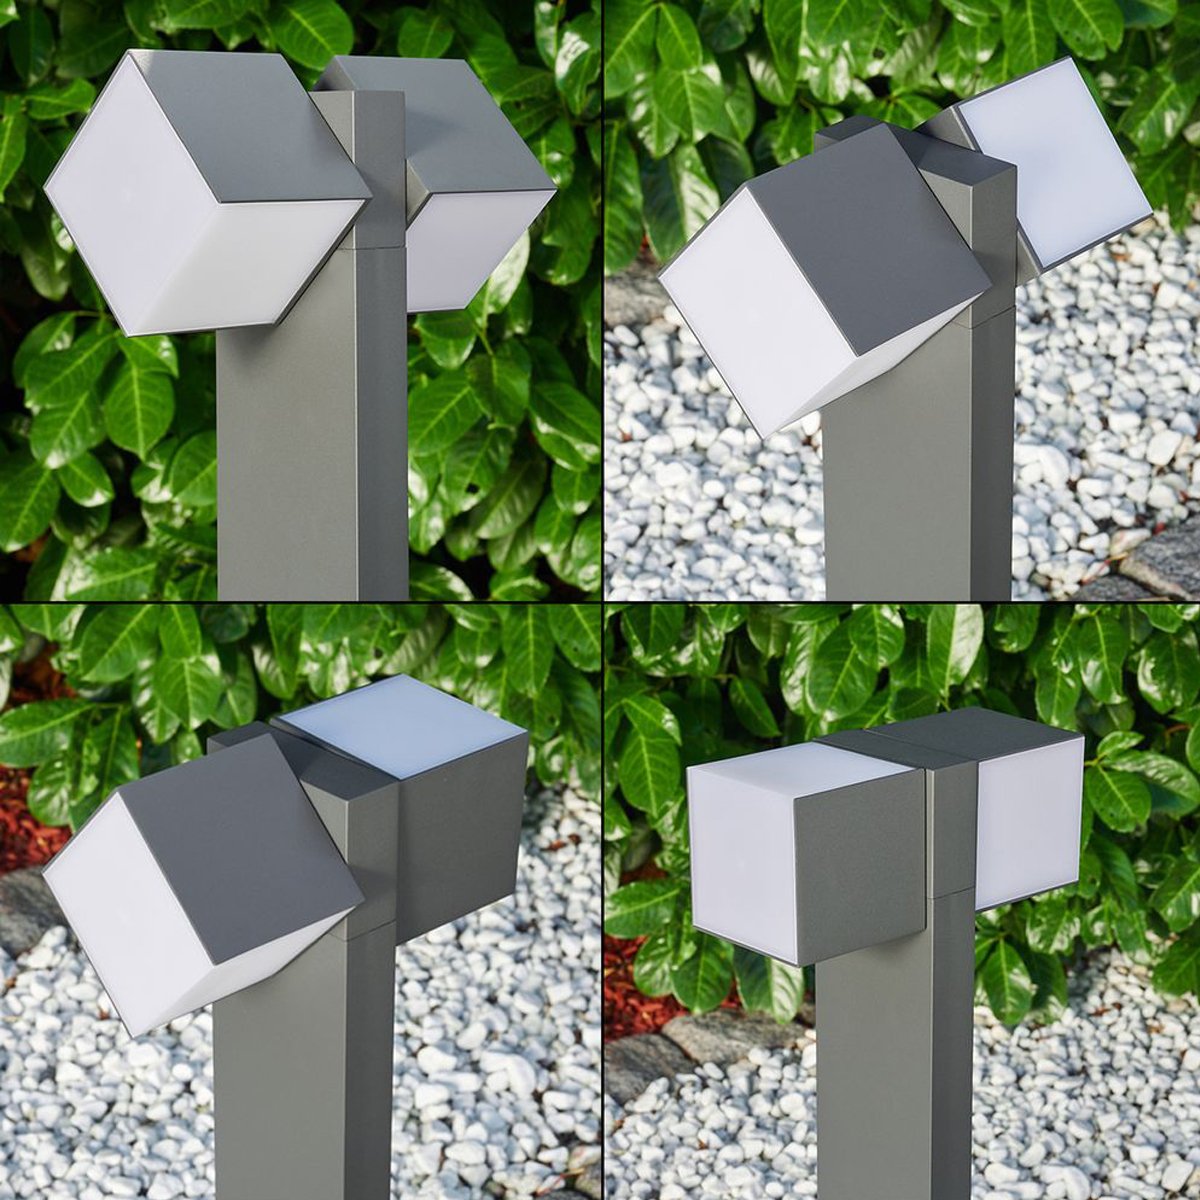 Come browse our Morgan dark grey double cube outdoor post light by CGC Interiors. This cube light installed in your home’s exterior space, creating an atmospheric lighting system for your garden, front door, or driveway to provide style and an extra security solution. The clever construction of this light allows you to adjust the light to your desired style and light output.